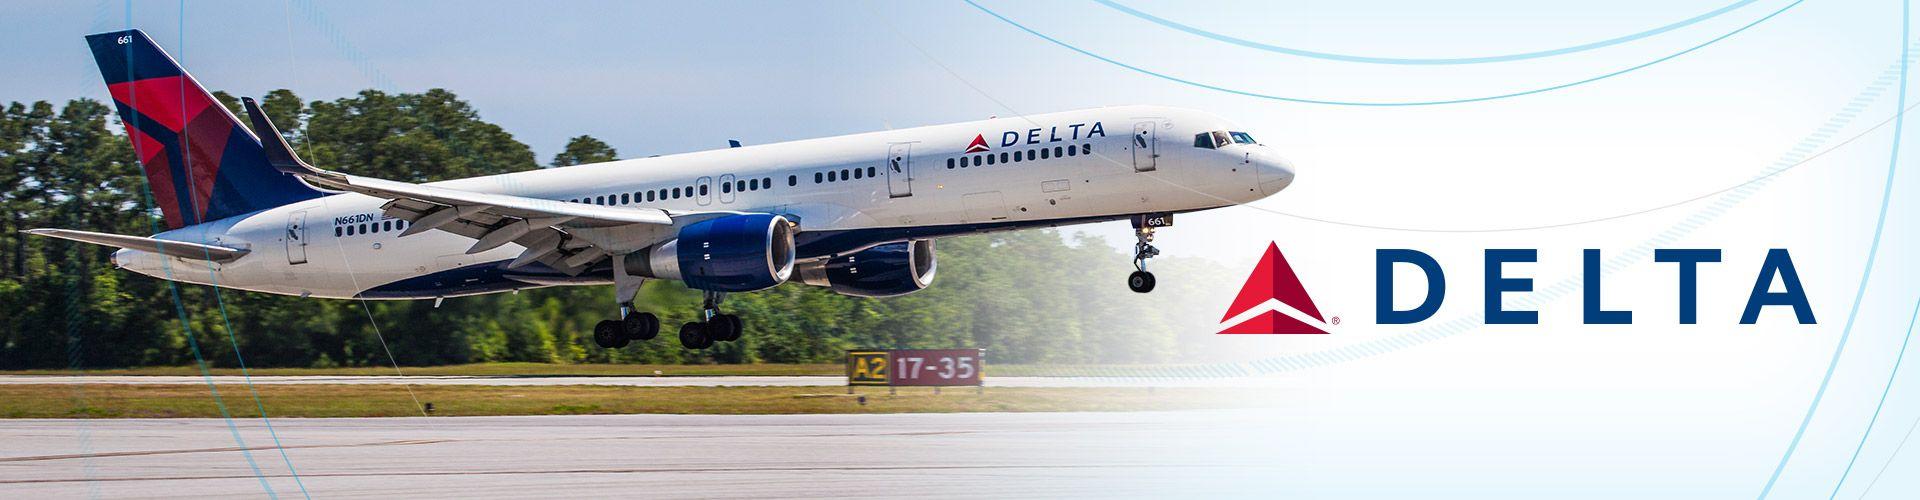 Awesome Delta Airlines HD Wallpaper Free Download